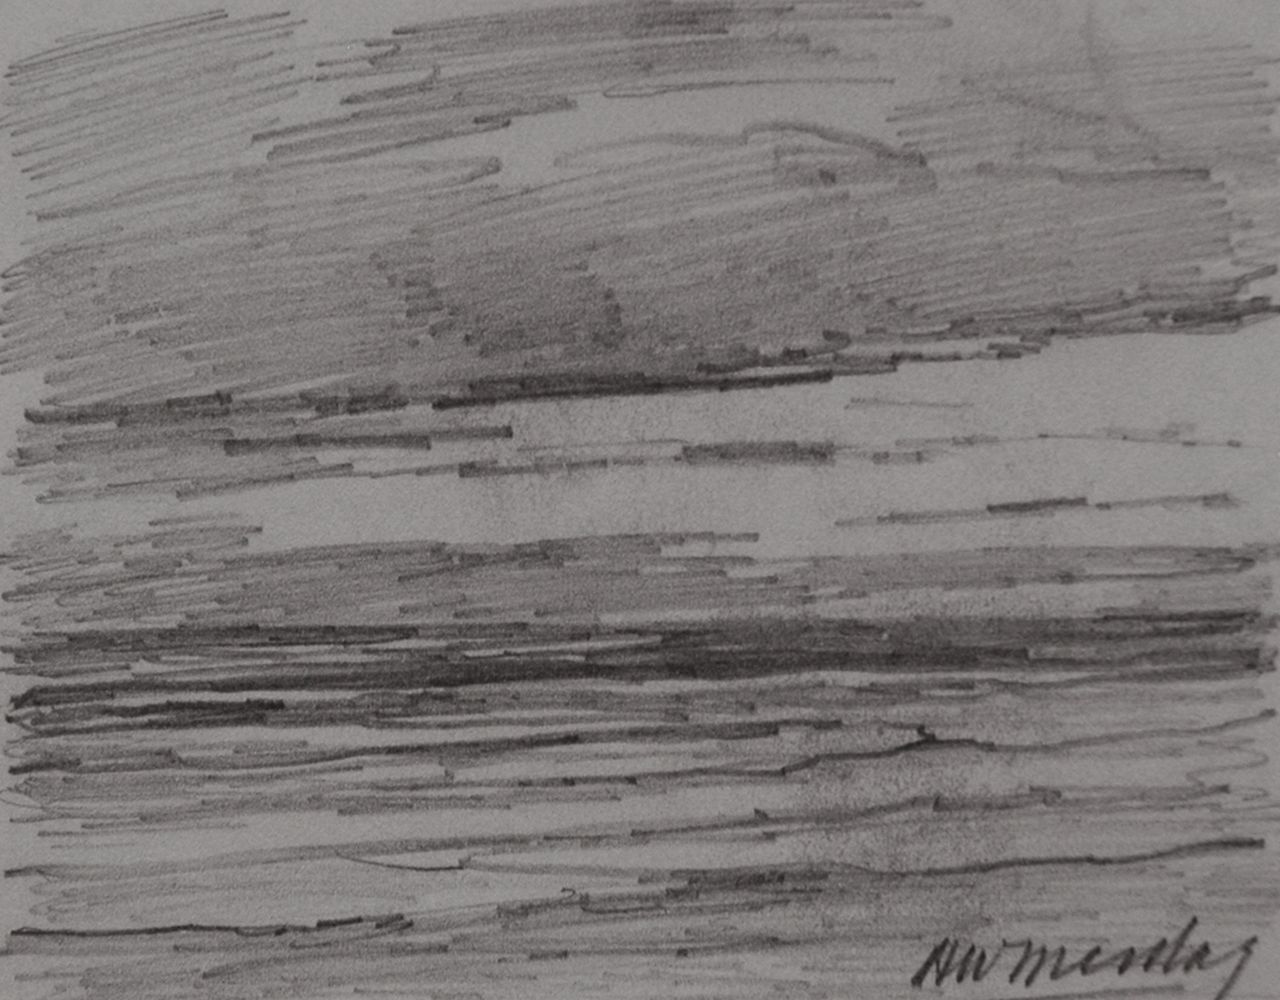 Mesdag H.W.  | Hendrik Willem Mesdag, Sea and clouds, pencil on paper 8.7 x 11.2 cm, signed l.r.